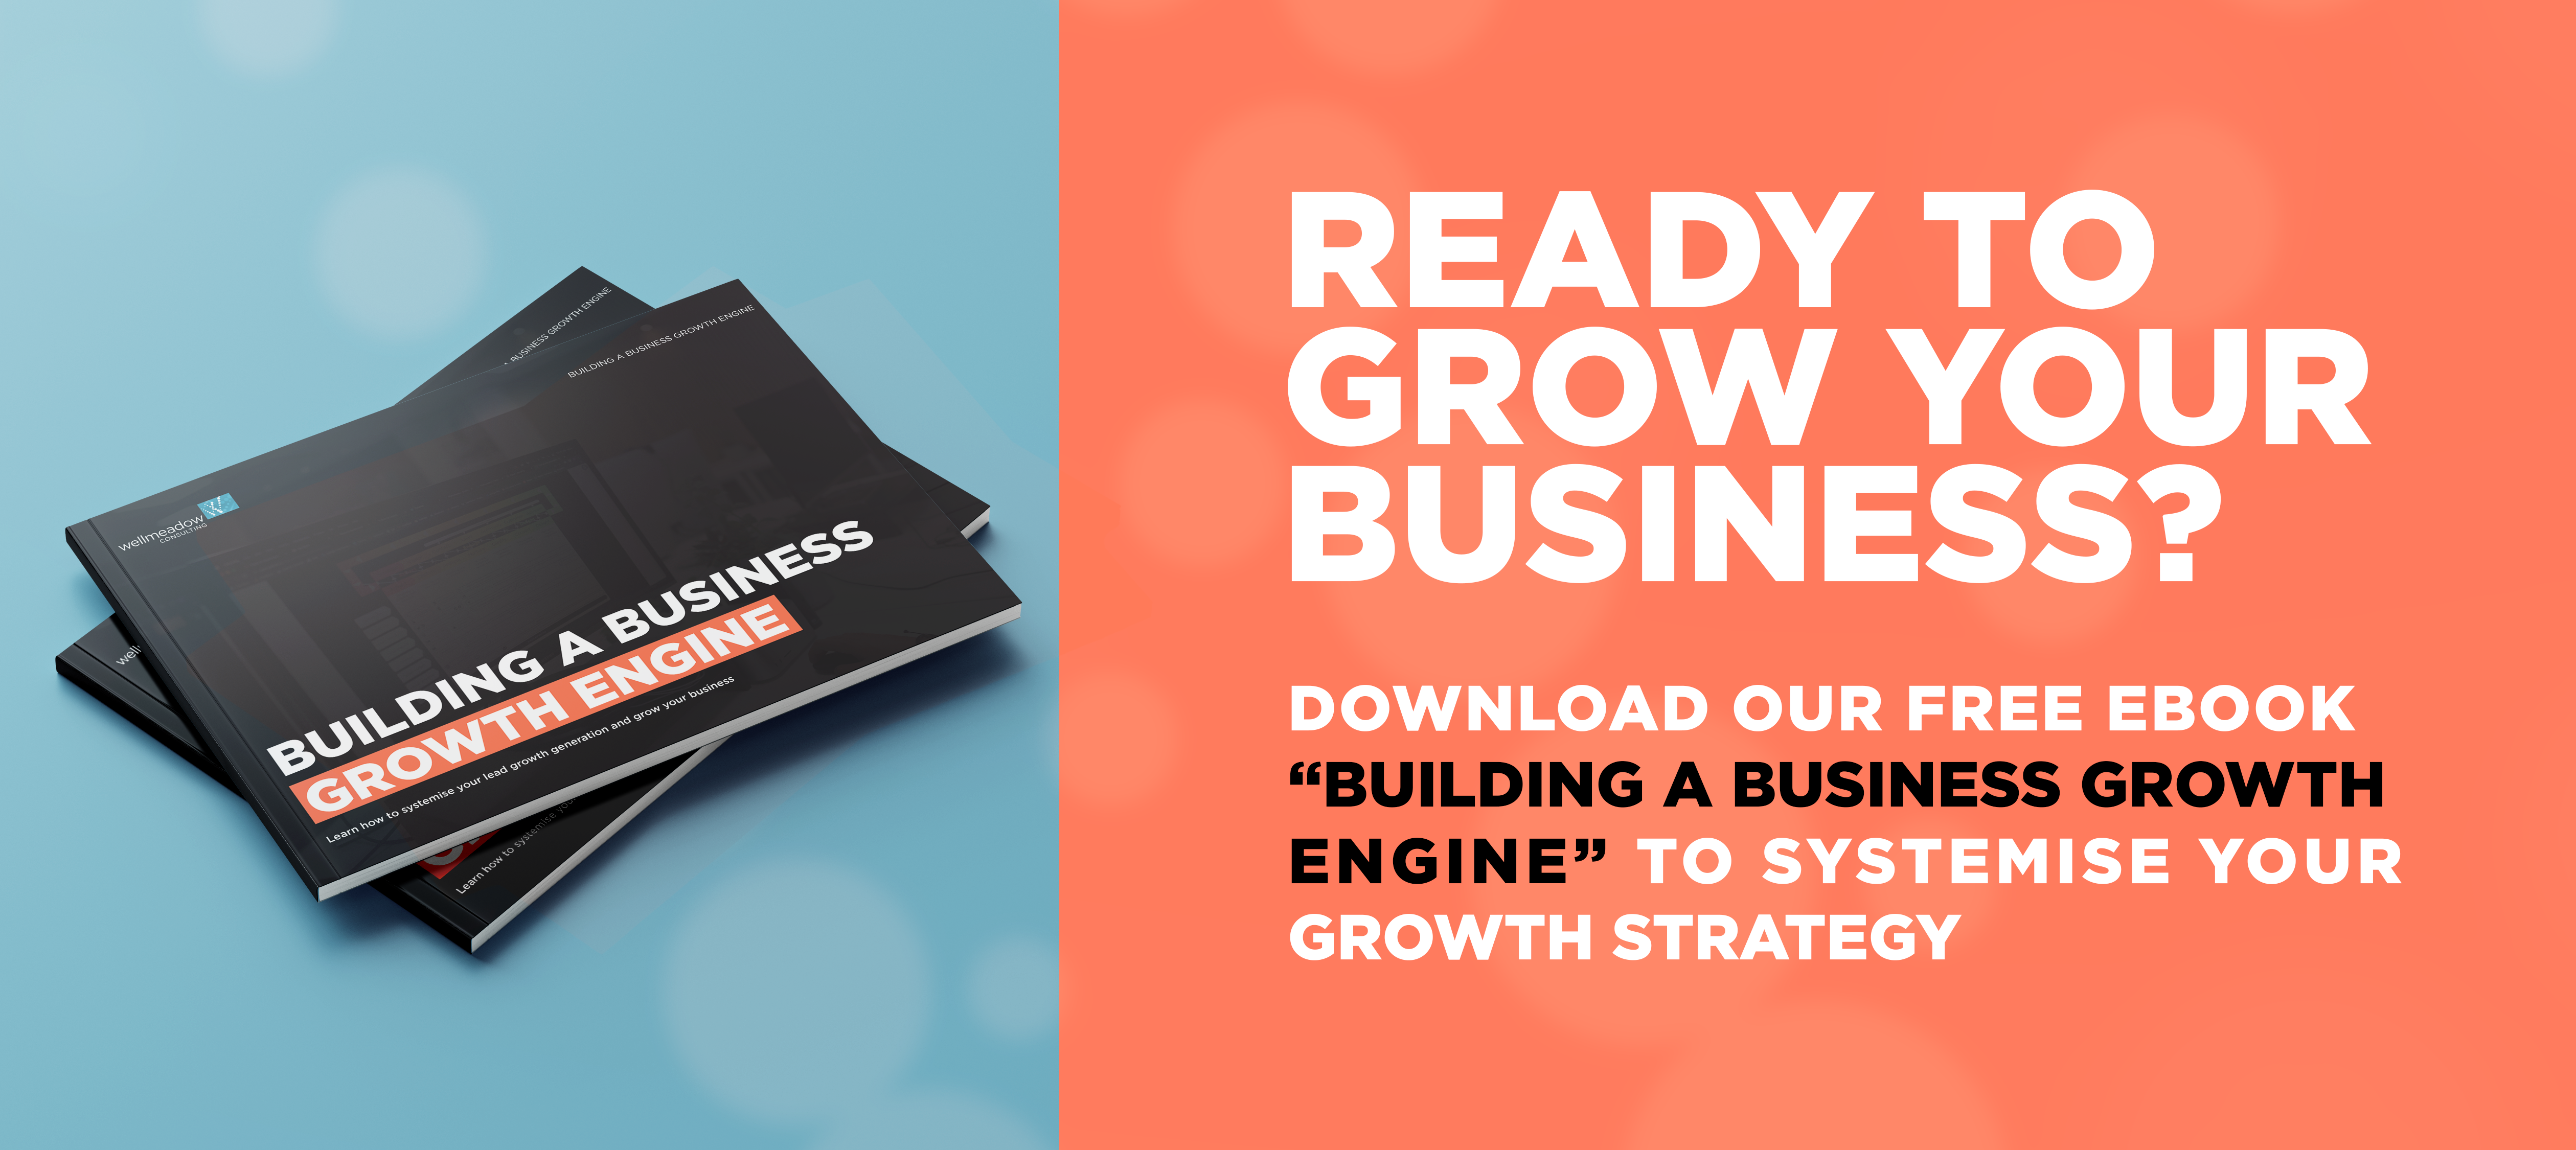 Download our free ebook "Building a business growth engine"